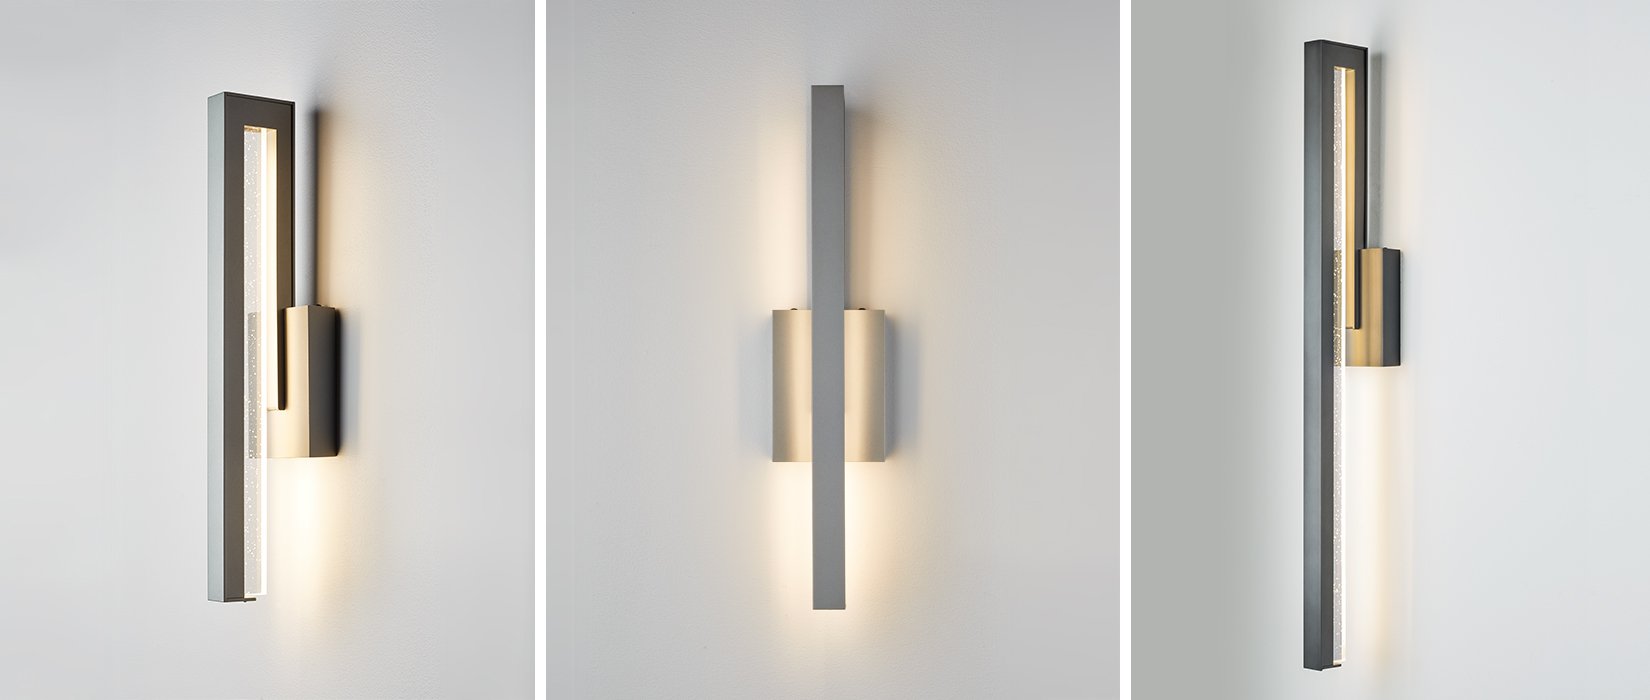 Edge Medium LED Outdoor Sconce ADA compliant direct wire LED wall sconce with finish and a Seeded Clear glass diffuser